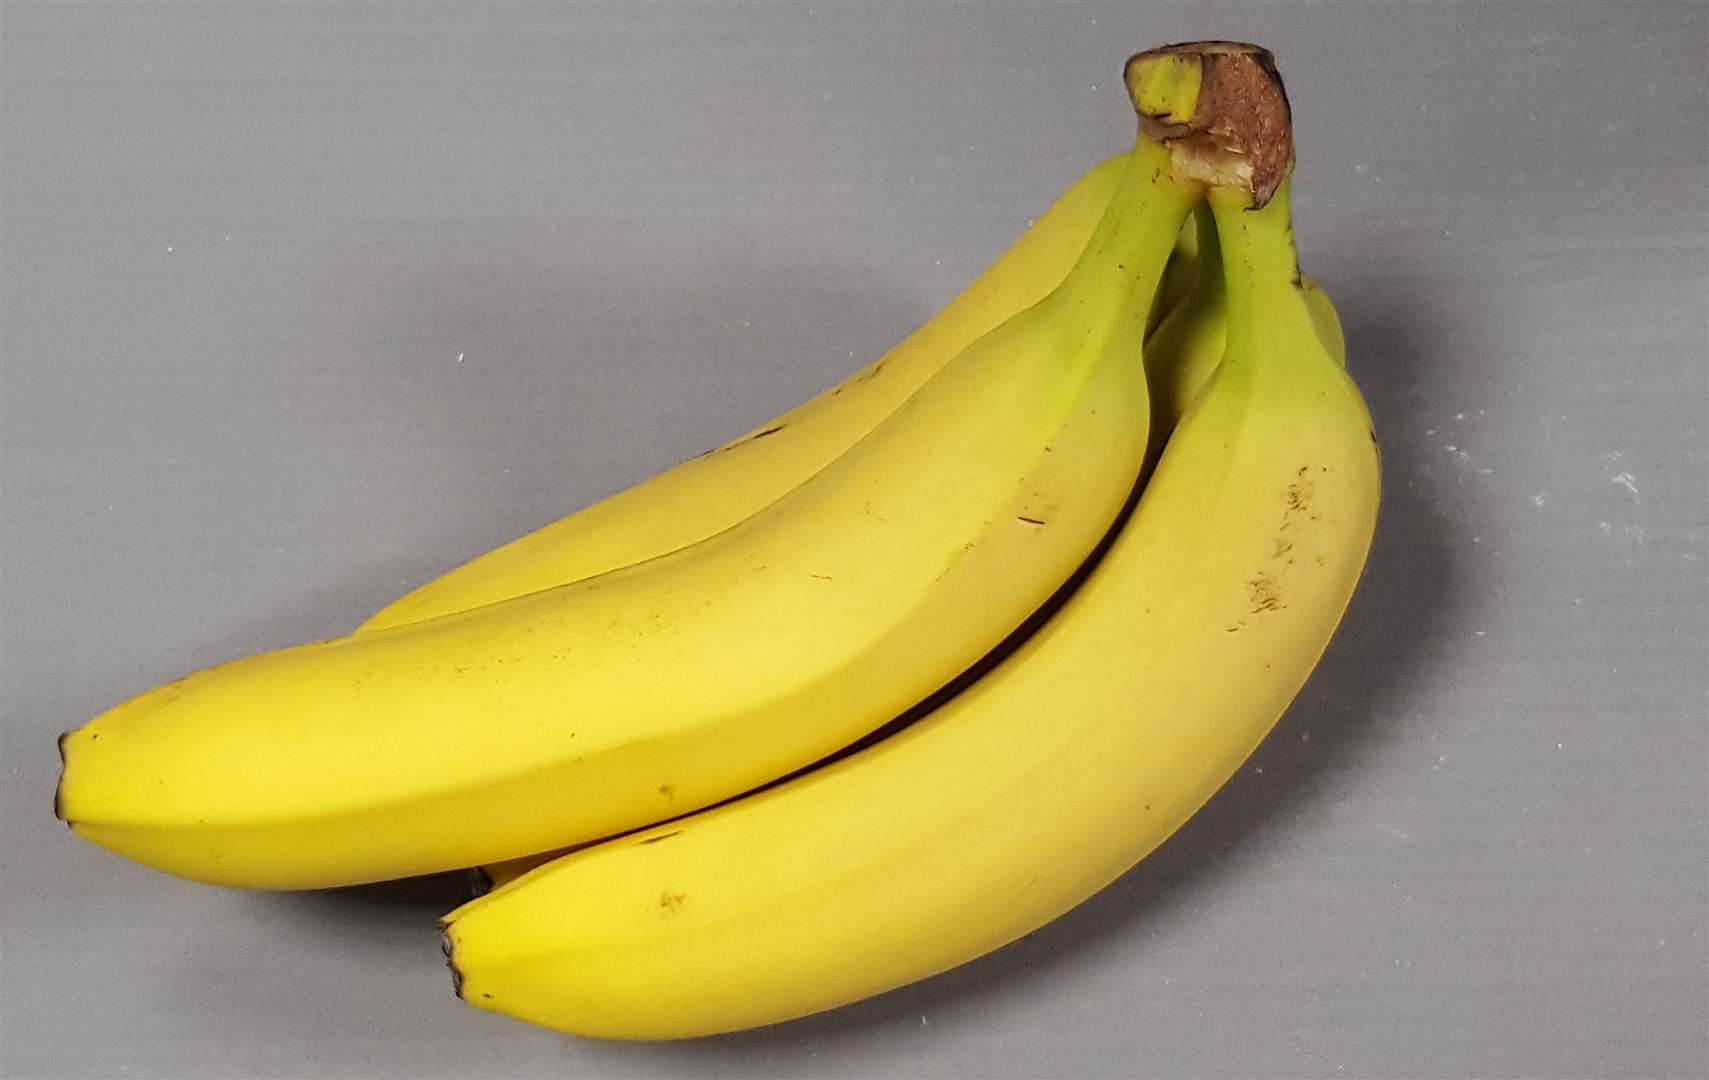 The more brown a banana gets the higher its sugar content will be